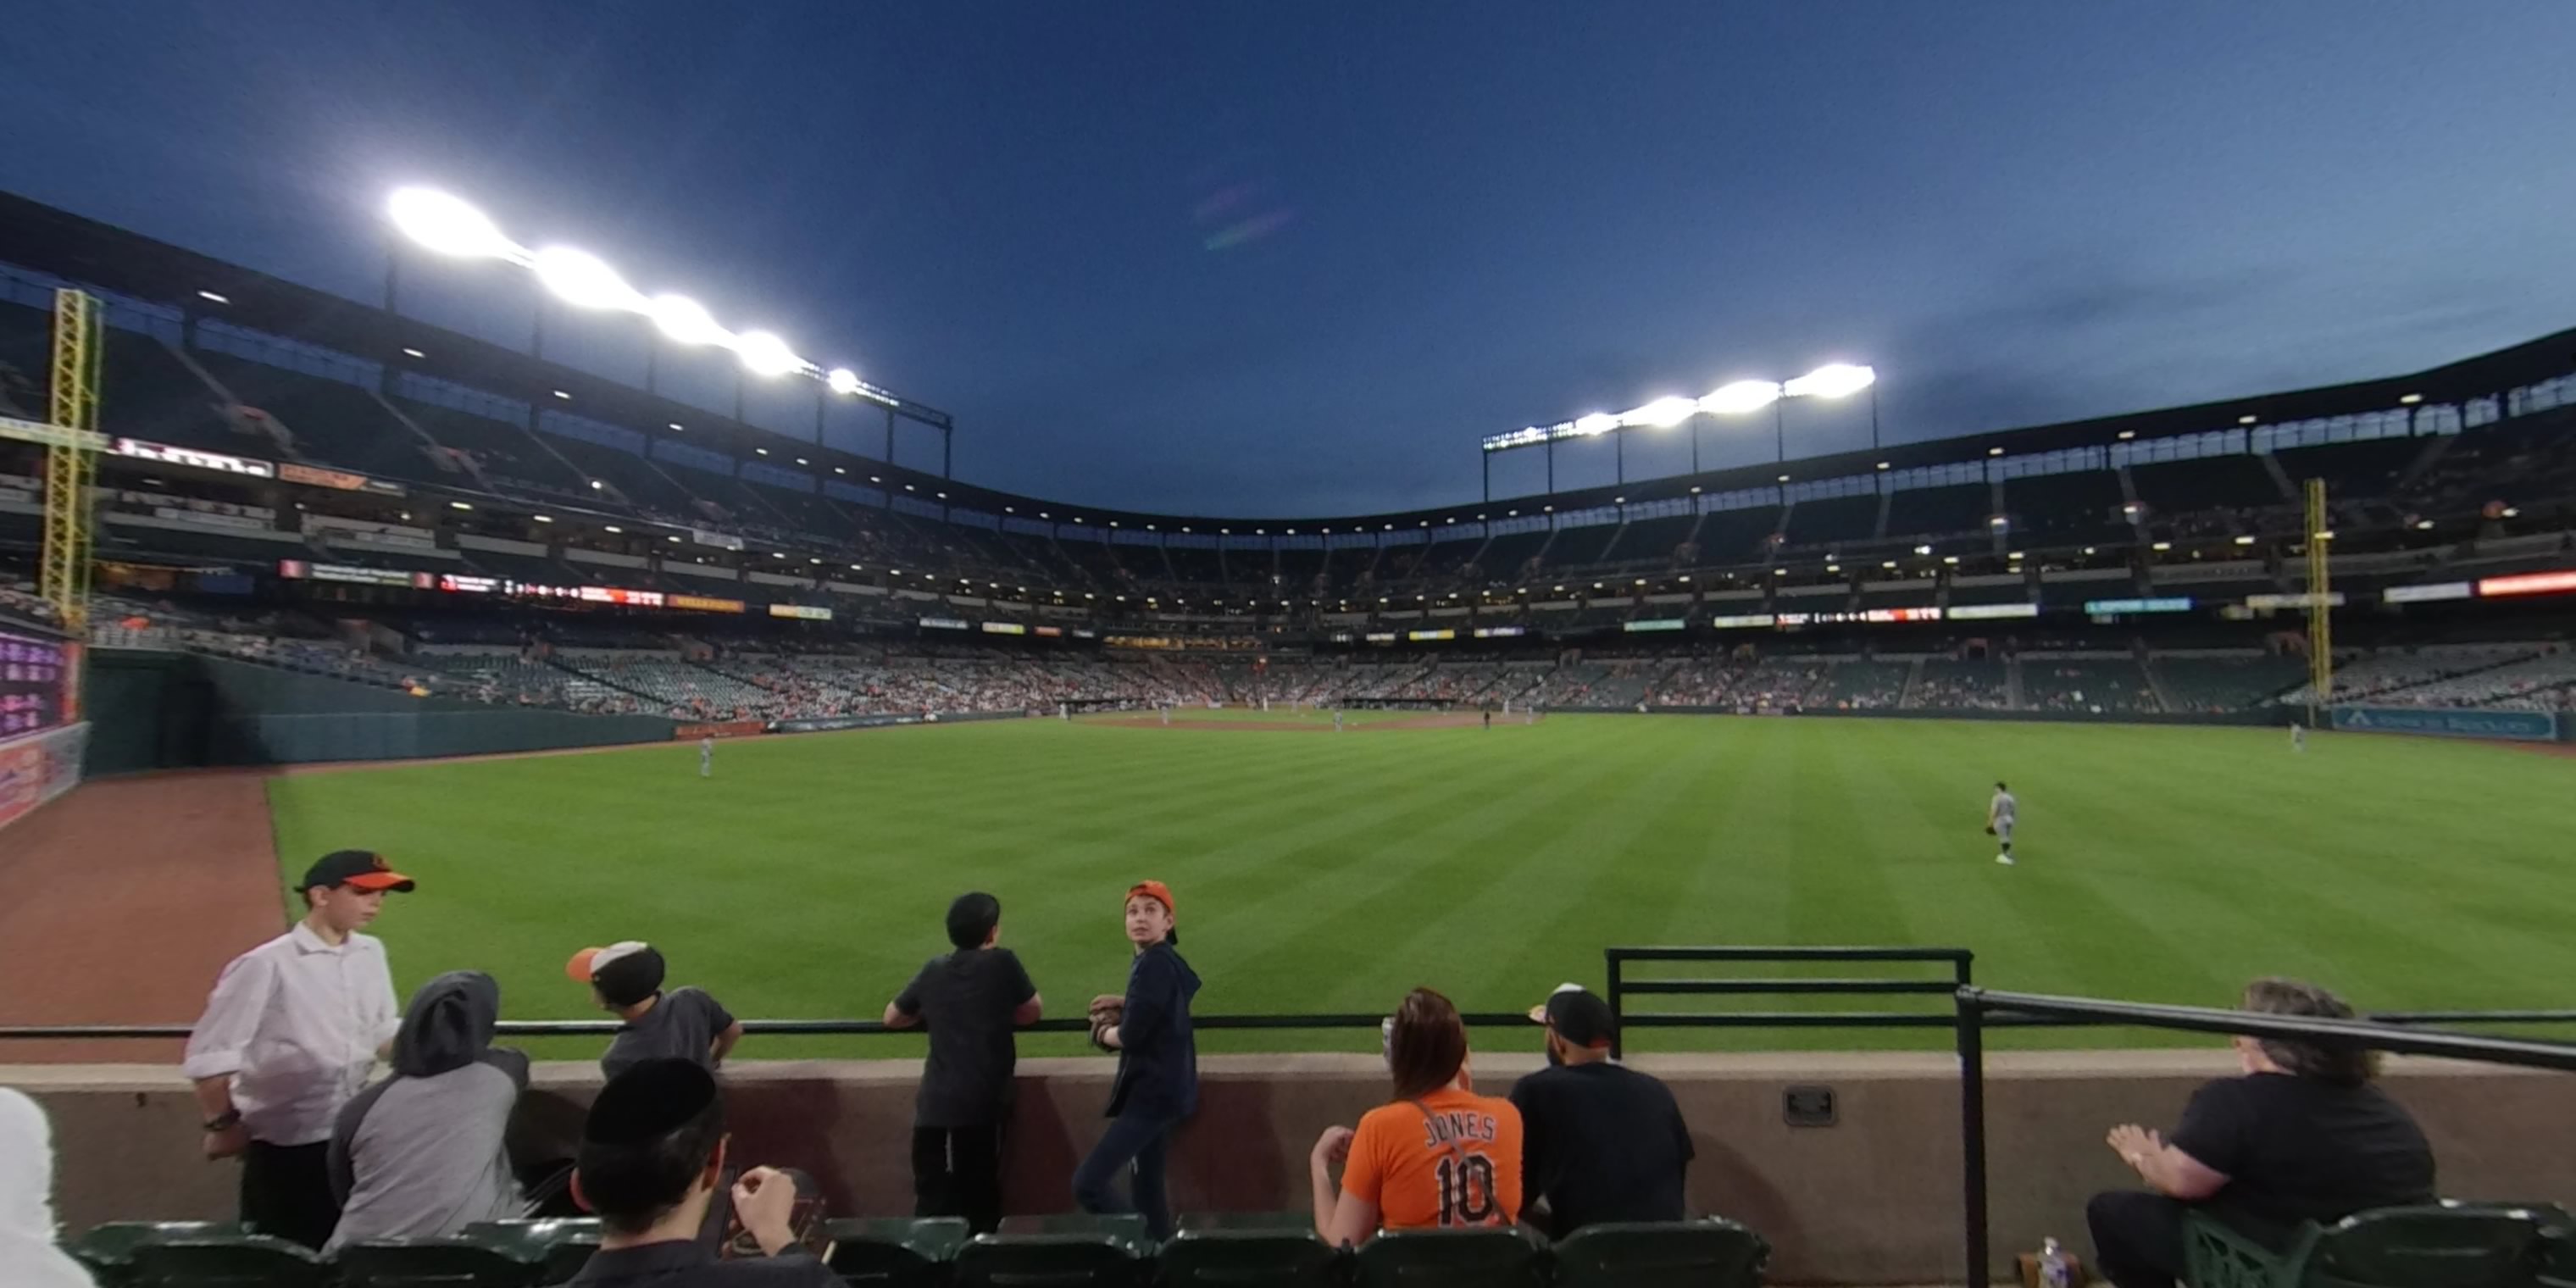 Section 92 at Oriole Park 